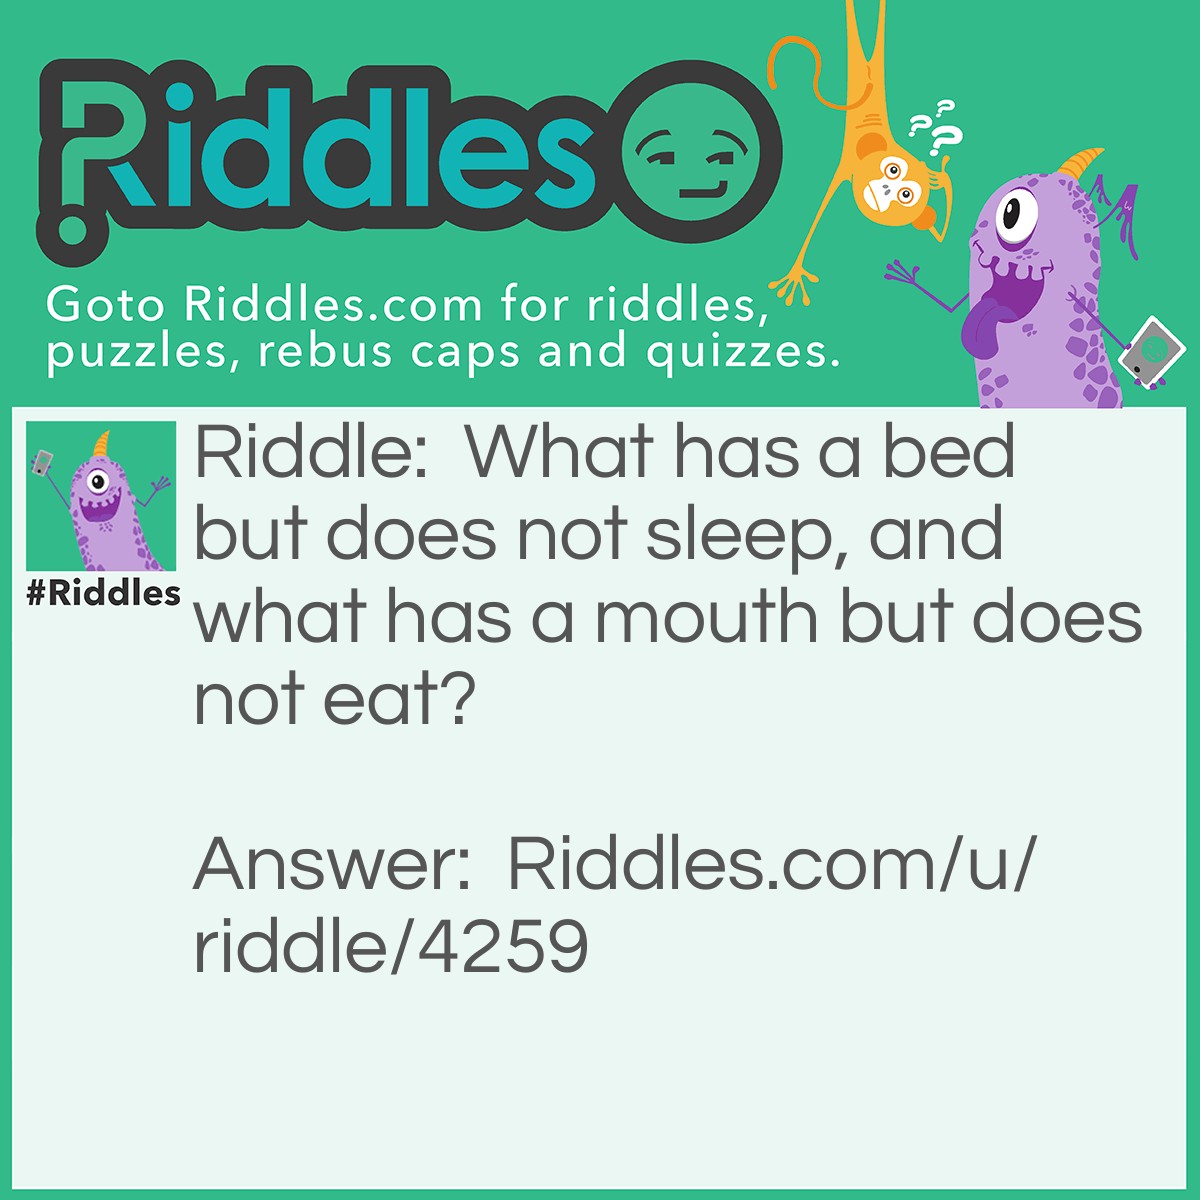 Riddle: What has a bed but does not sleep, and what has a mouth but does not eat? Answer: A river.